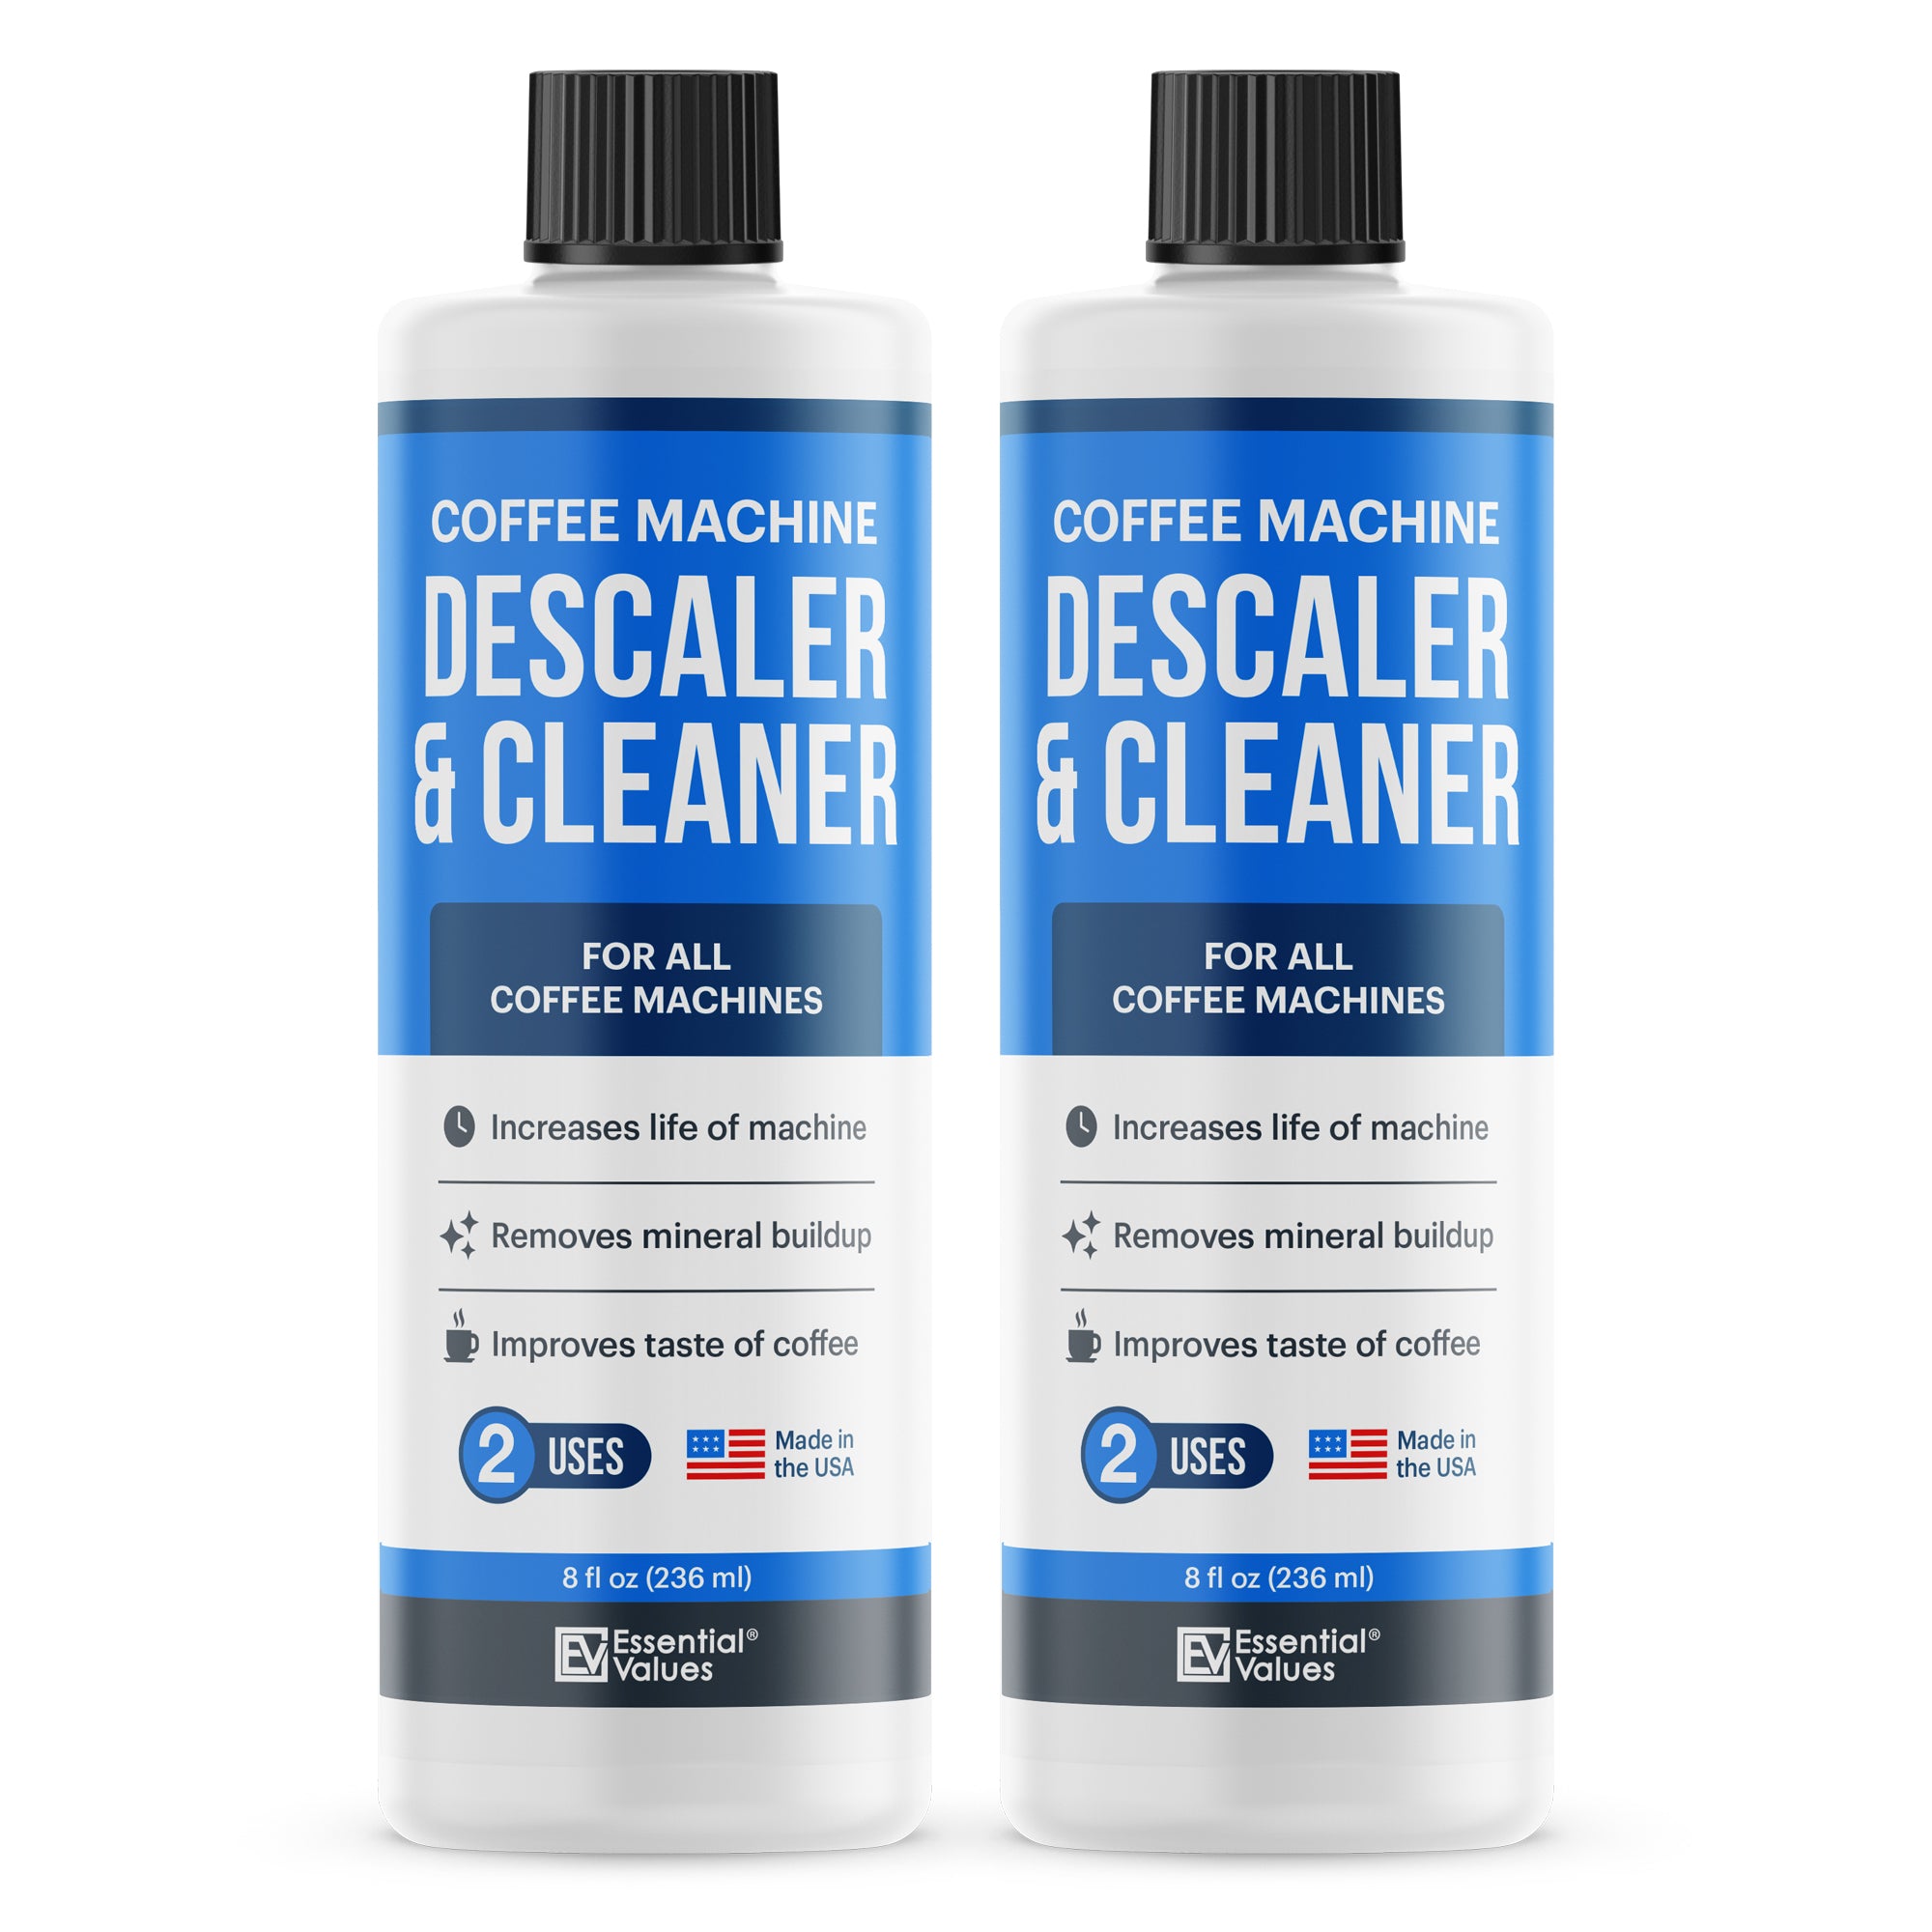  Coffee Machine Descaler - 2 Uses - Descaling Solution for  Nespresso Breville Keurig Jura & More - USA Made Cleaner For All Coffee  Machines, Glass Pot Cleaner and Espresso Makers: Home & Kitchen